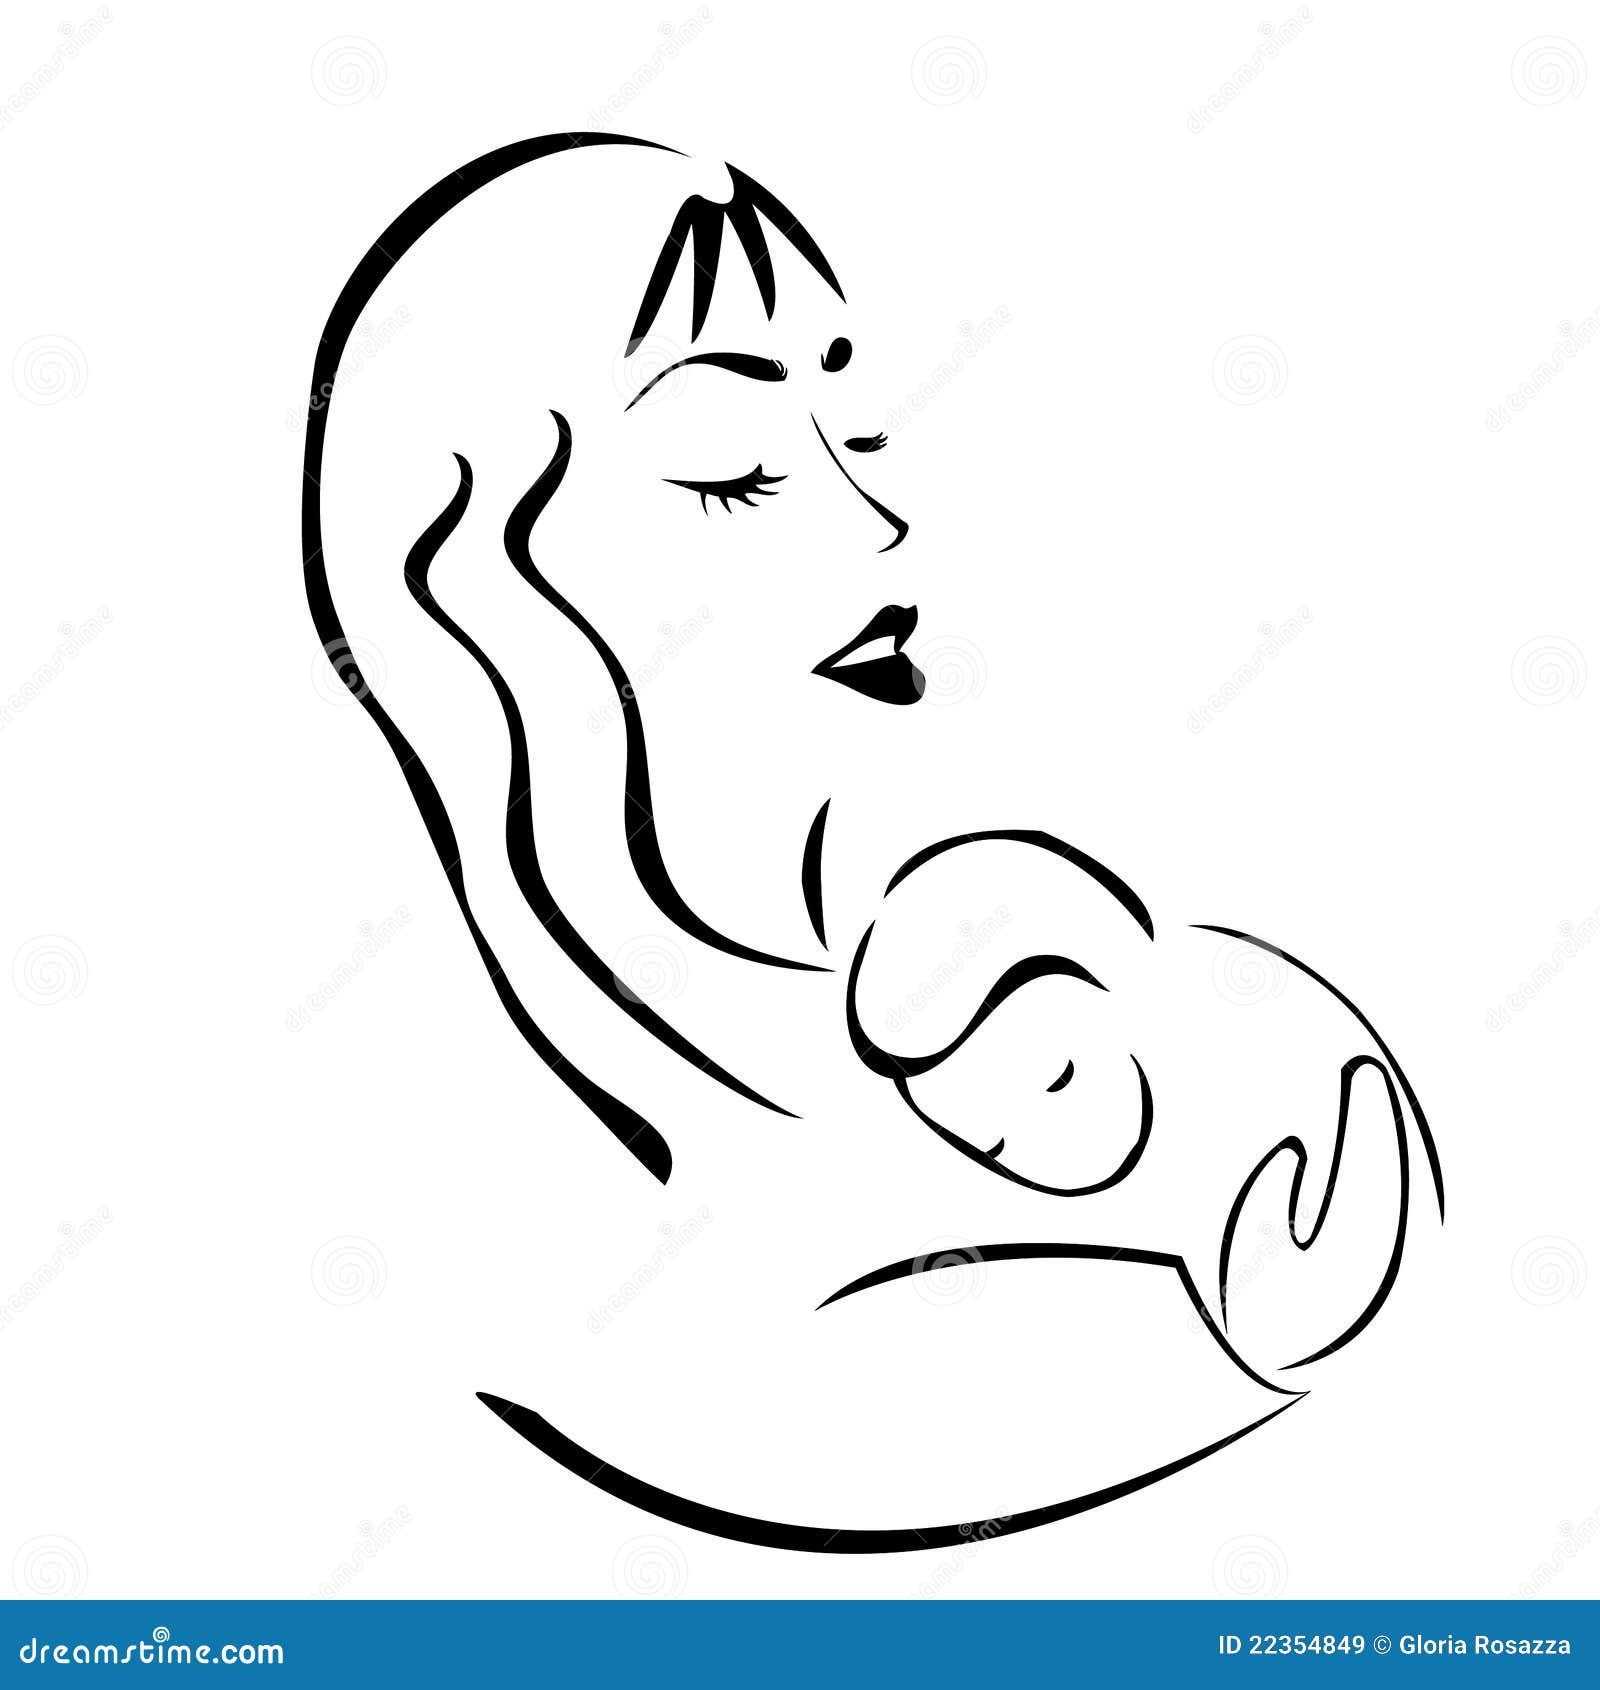 Mother And Baby Silhouette Royalty Free Stock Images - Image: 22354849